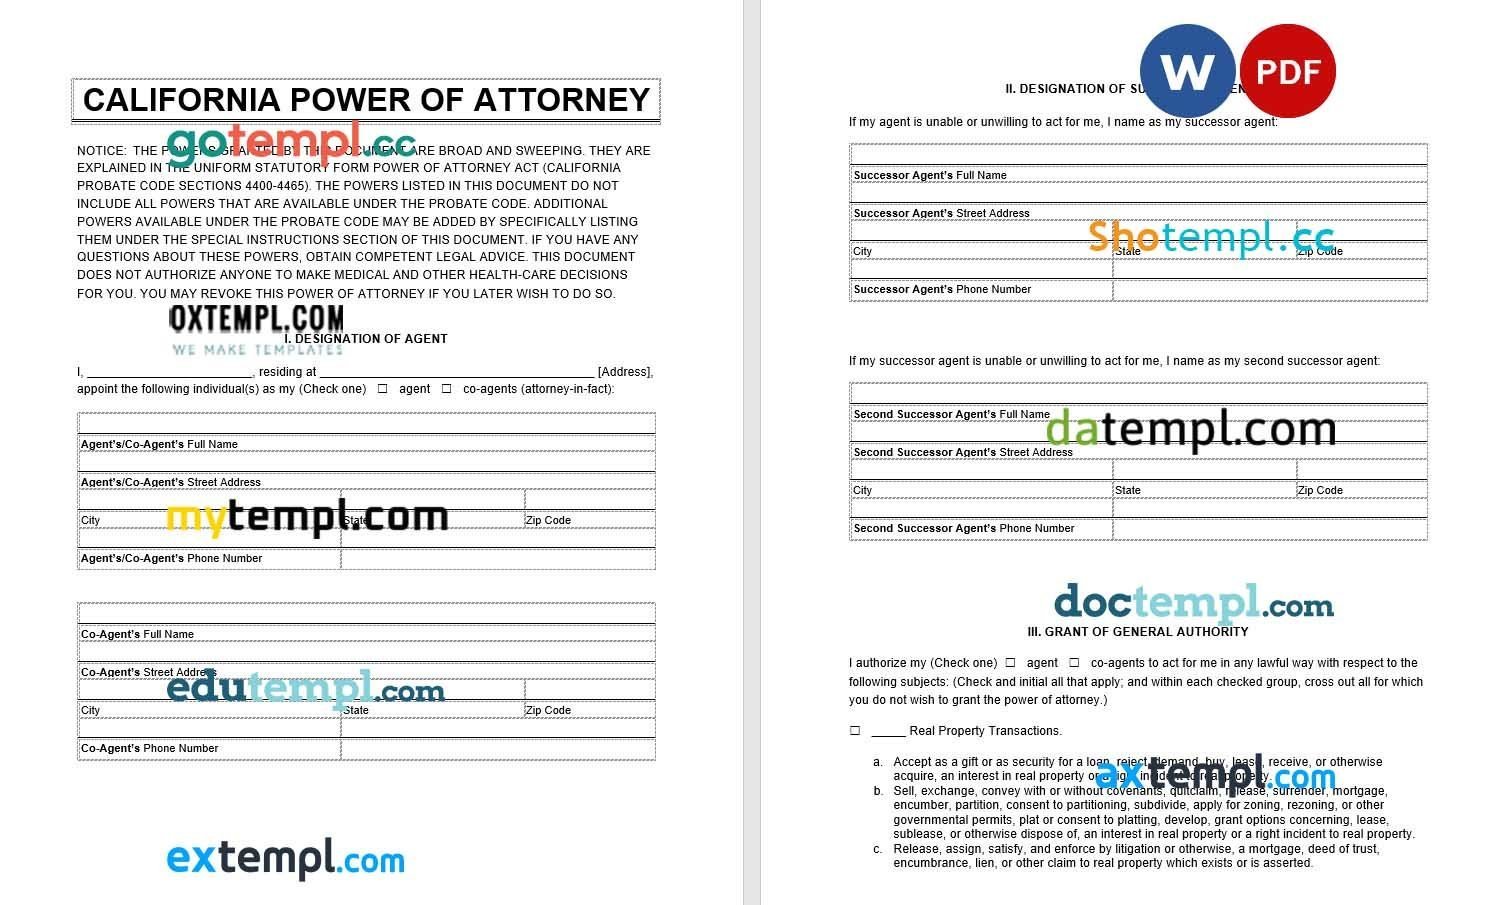 California Power of Attorney example, fully editable